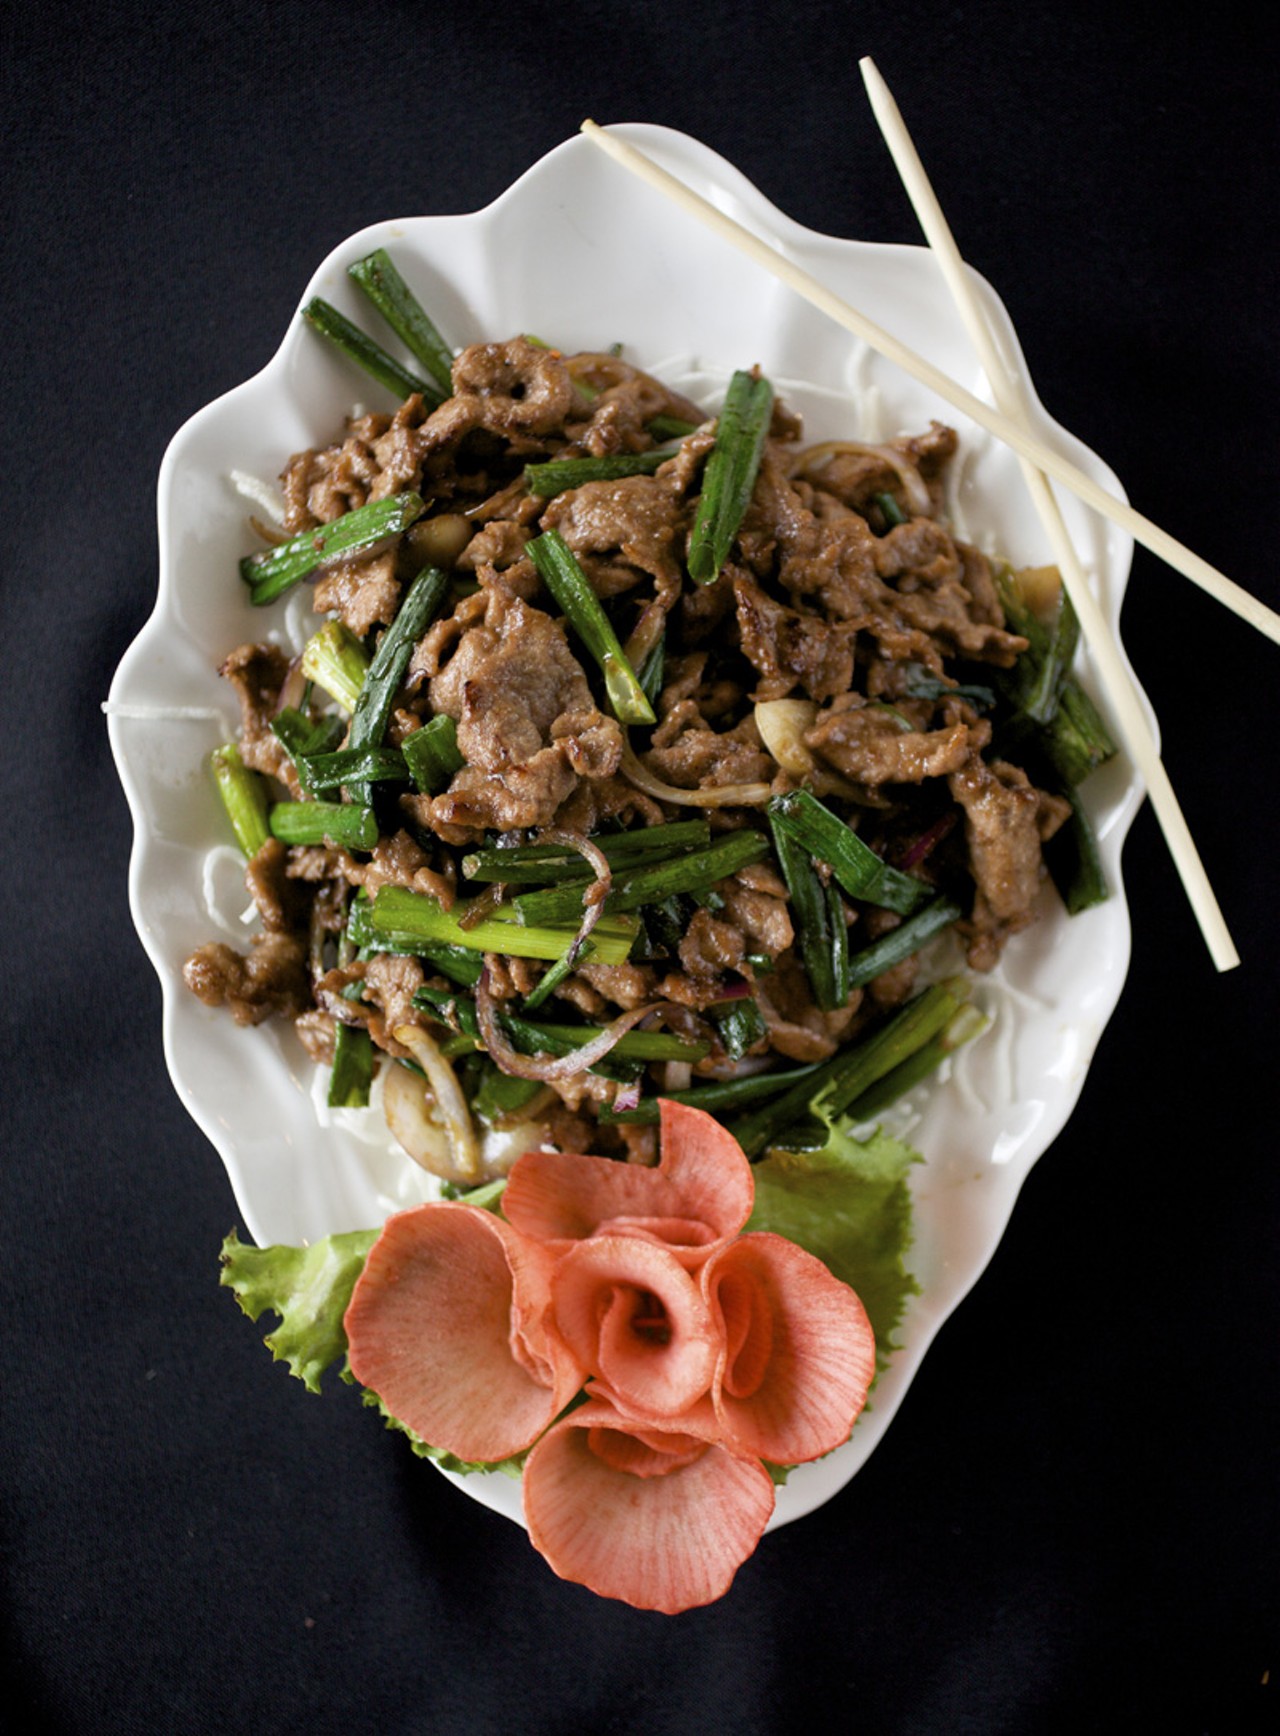 Ginger's Mongolian Beef is sauteed with scallions and red onions.